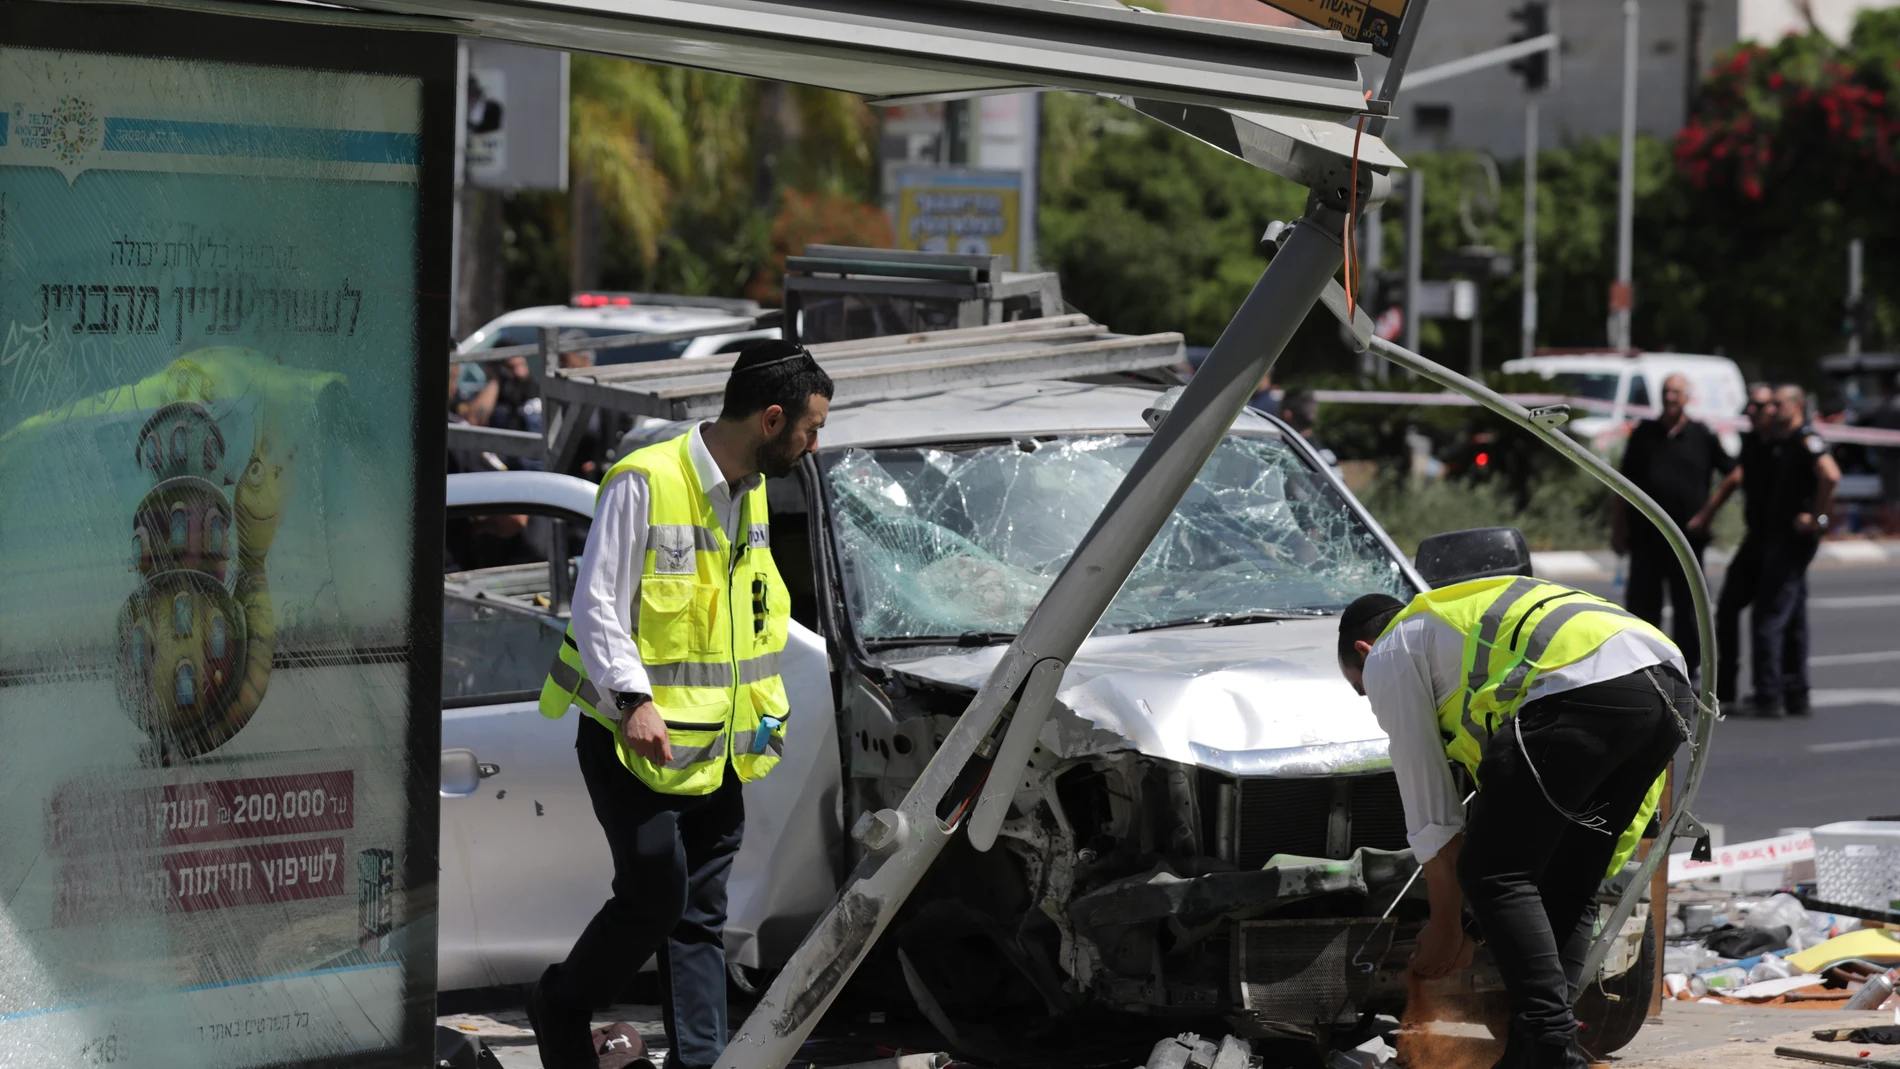 Tel Aviv (Israel), 04/07/2023.- Israeli emergency workers operate at the site of a car ramming attack in Tel Aviv, Israel, 04 July 2023. According to the Israeli Police on 04 July, about 7 people were injured after a "suspect that was driving a vehicle on Pinchas Rosen street, rammed into pedestrians standing in the shopping center and proceeded to get out of the vehicle to stab civilians with a sharp object". The man involved in the reported event was "neutralized". (Atentado) EFE/EPA/ABIR S...